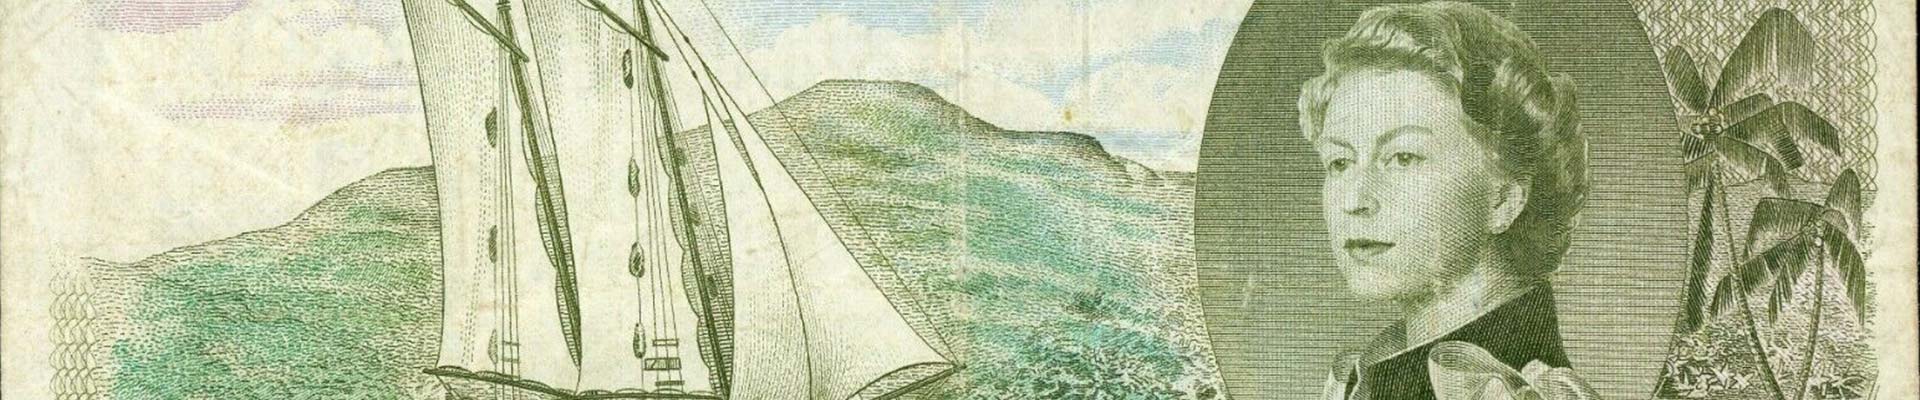 Sex and Scum Banknotes:  Seychelles Rupees header image